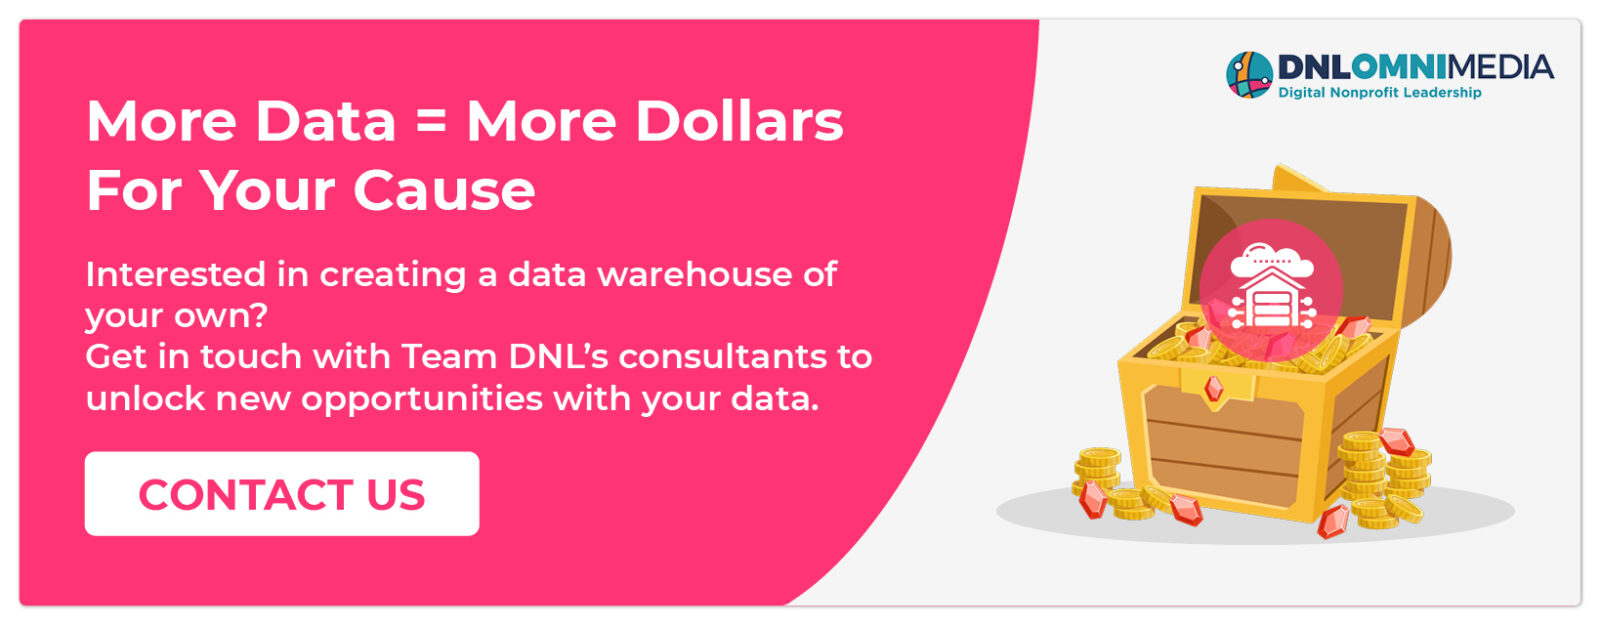 Contact DNL OmniMedia to unlock new opportunities with a nonprofit data warehouse.